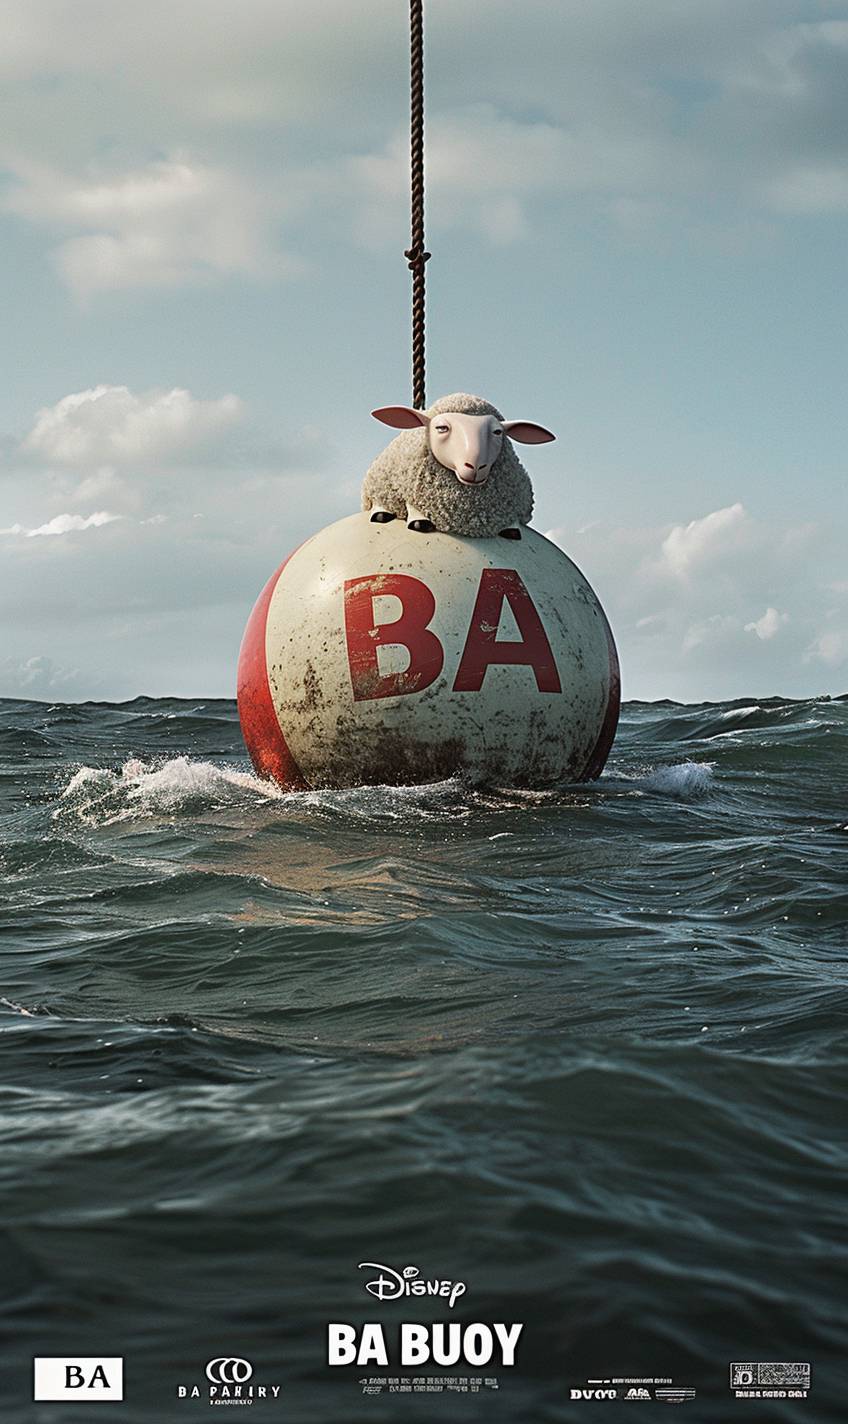 A Pixar movie poster called 'BA BA BUOY' which shows a buoy in the ocean that looks like a sheep, text title --ar 3:5 --v 6.0